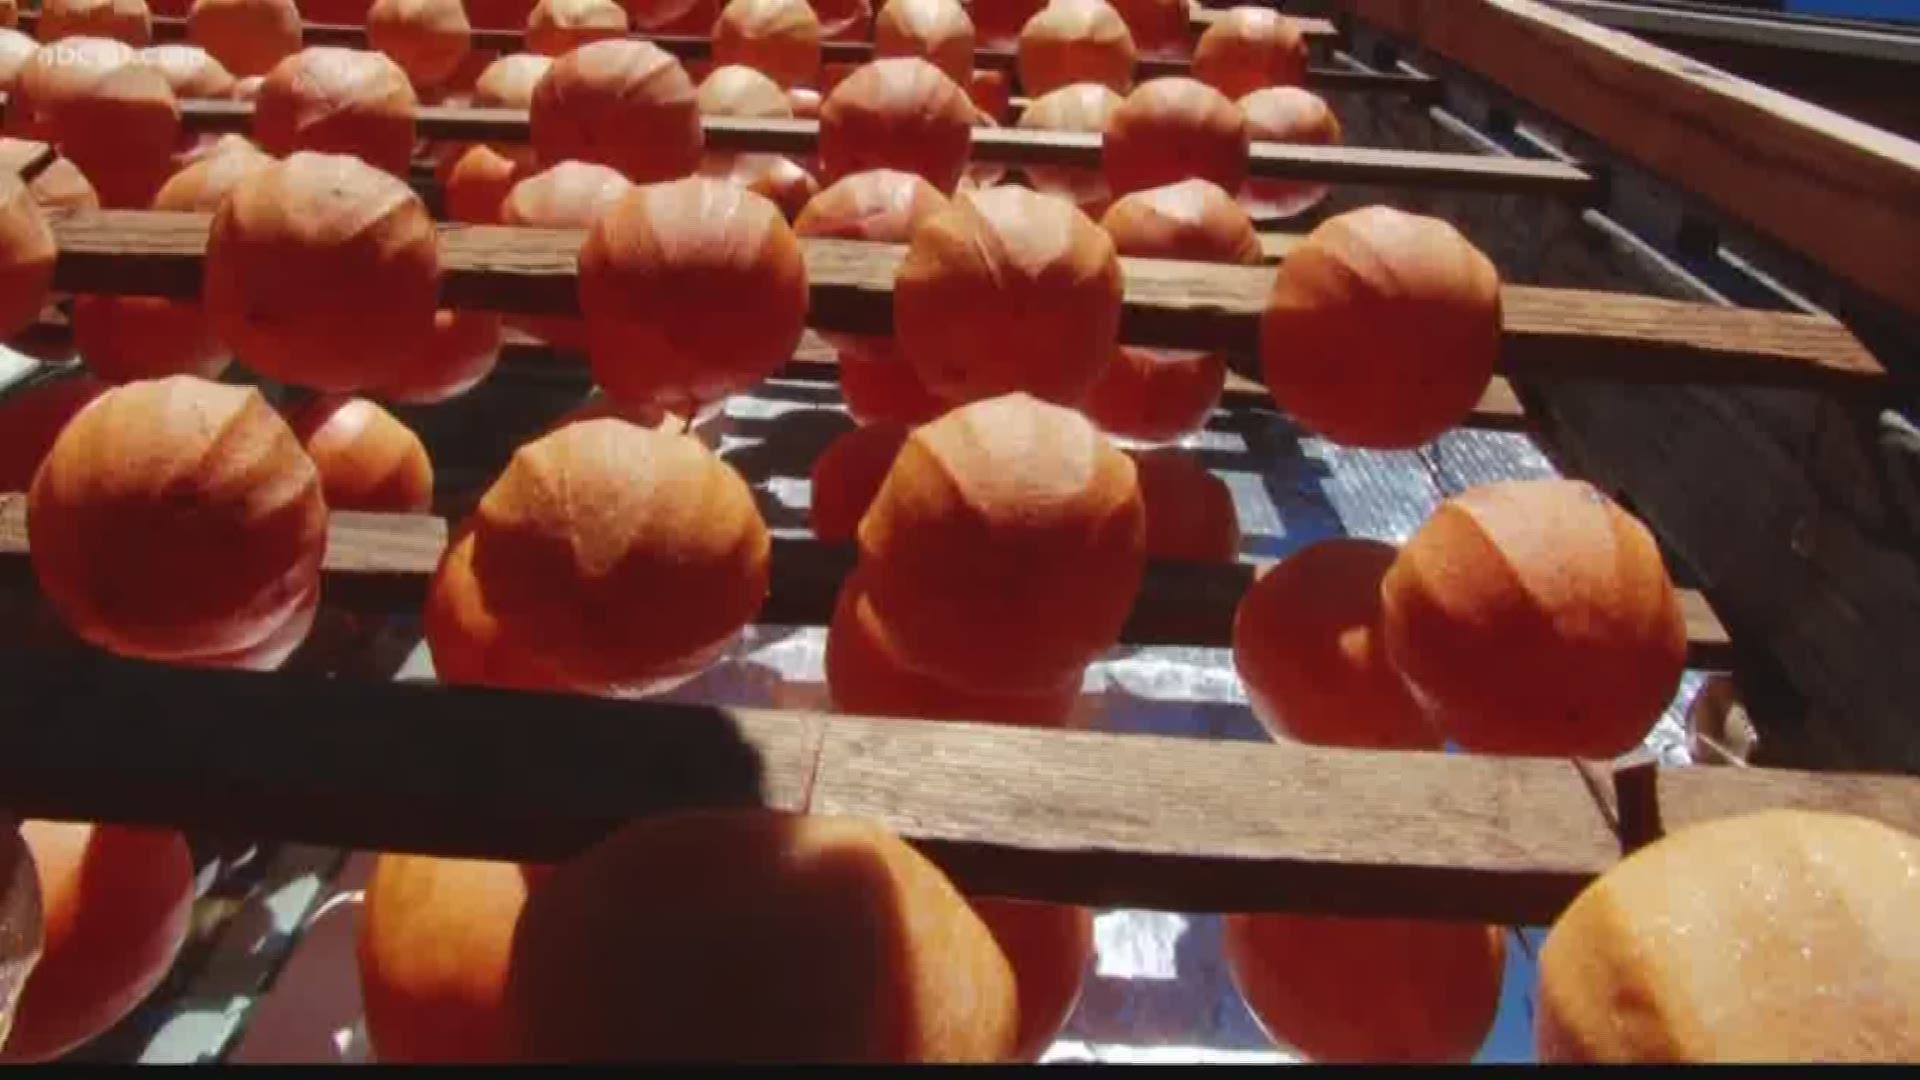 The Persimmon fruit is a hard flavor to define, but the process is just as unique. (Oct. 27, 2017)